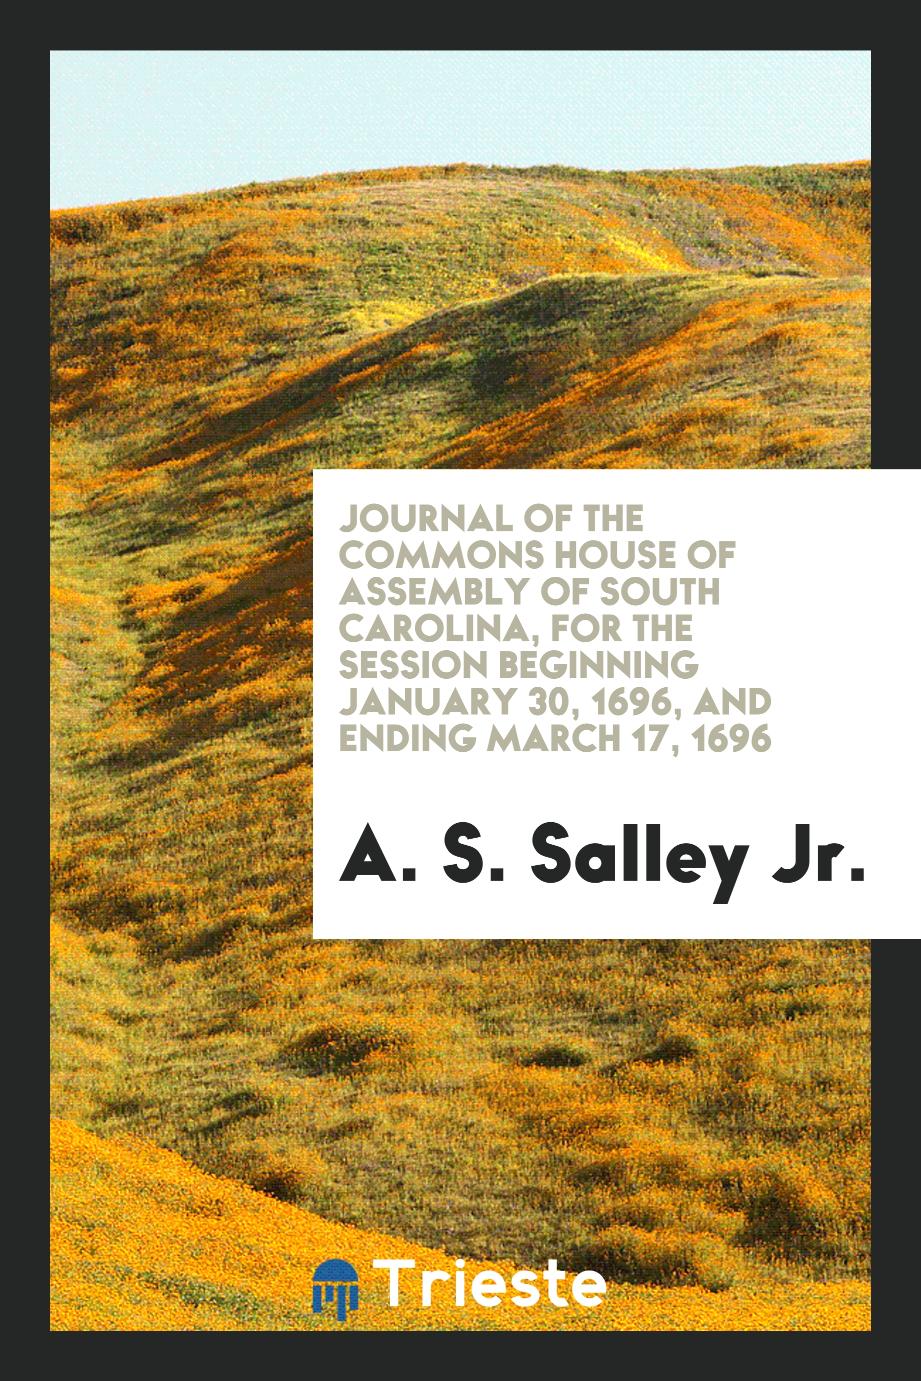 Journal of the Commons House of Assembly of South Carolina, for the session beginning january 30, 1696, and ending march 17, 1696